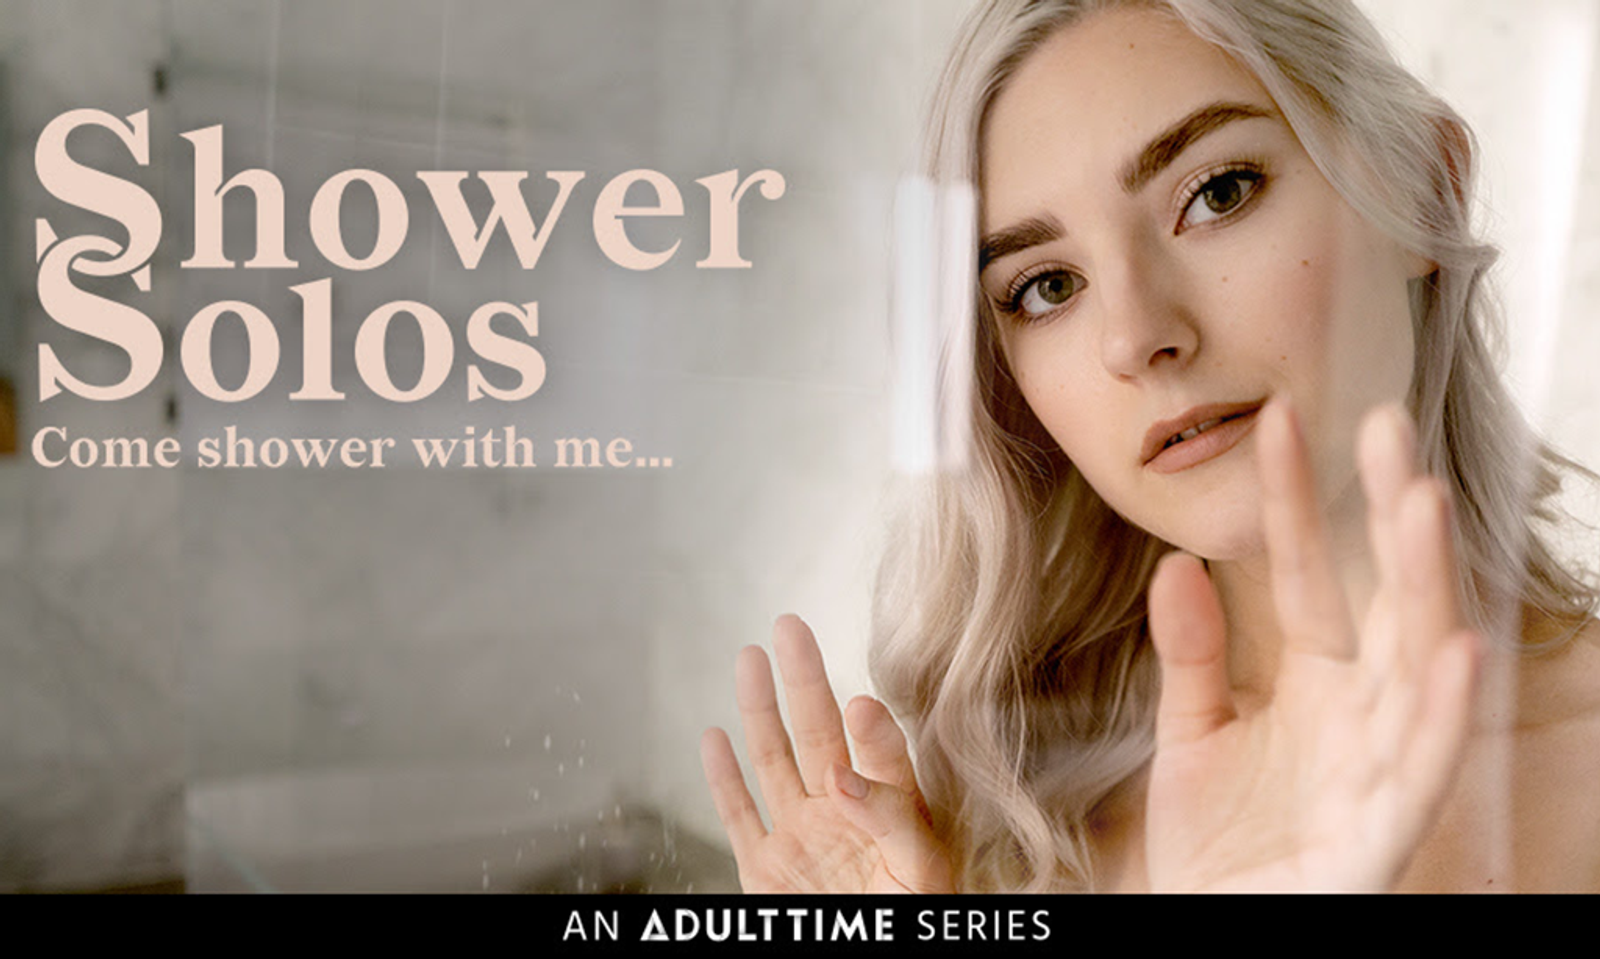 Adult Time Viewers Can Get Wet With All-New Series 'Shower Solos'